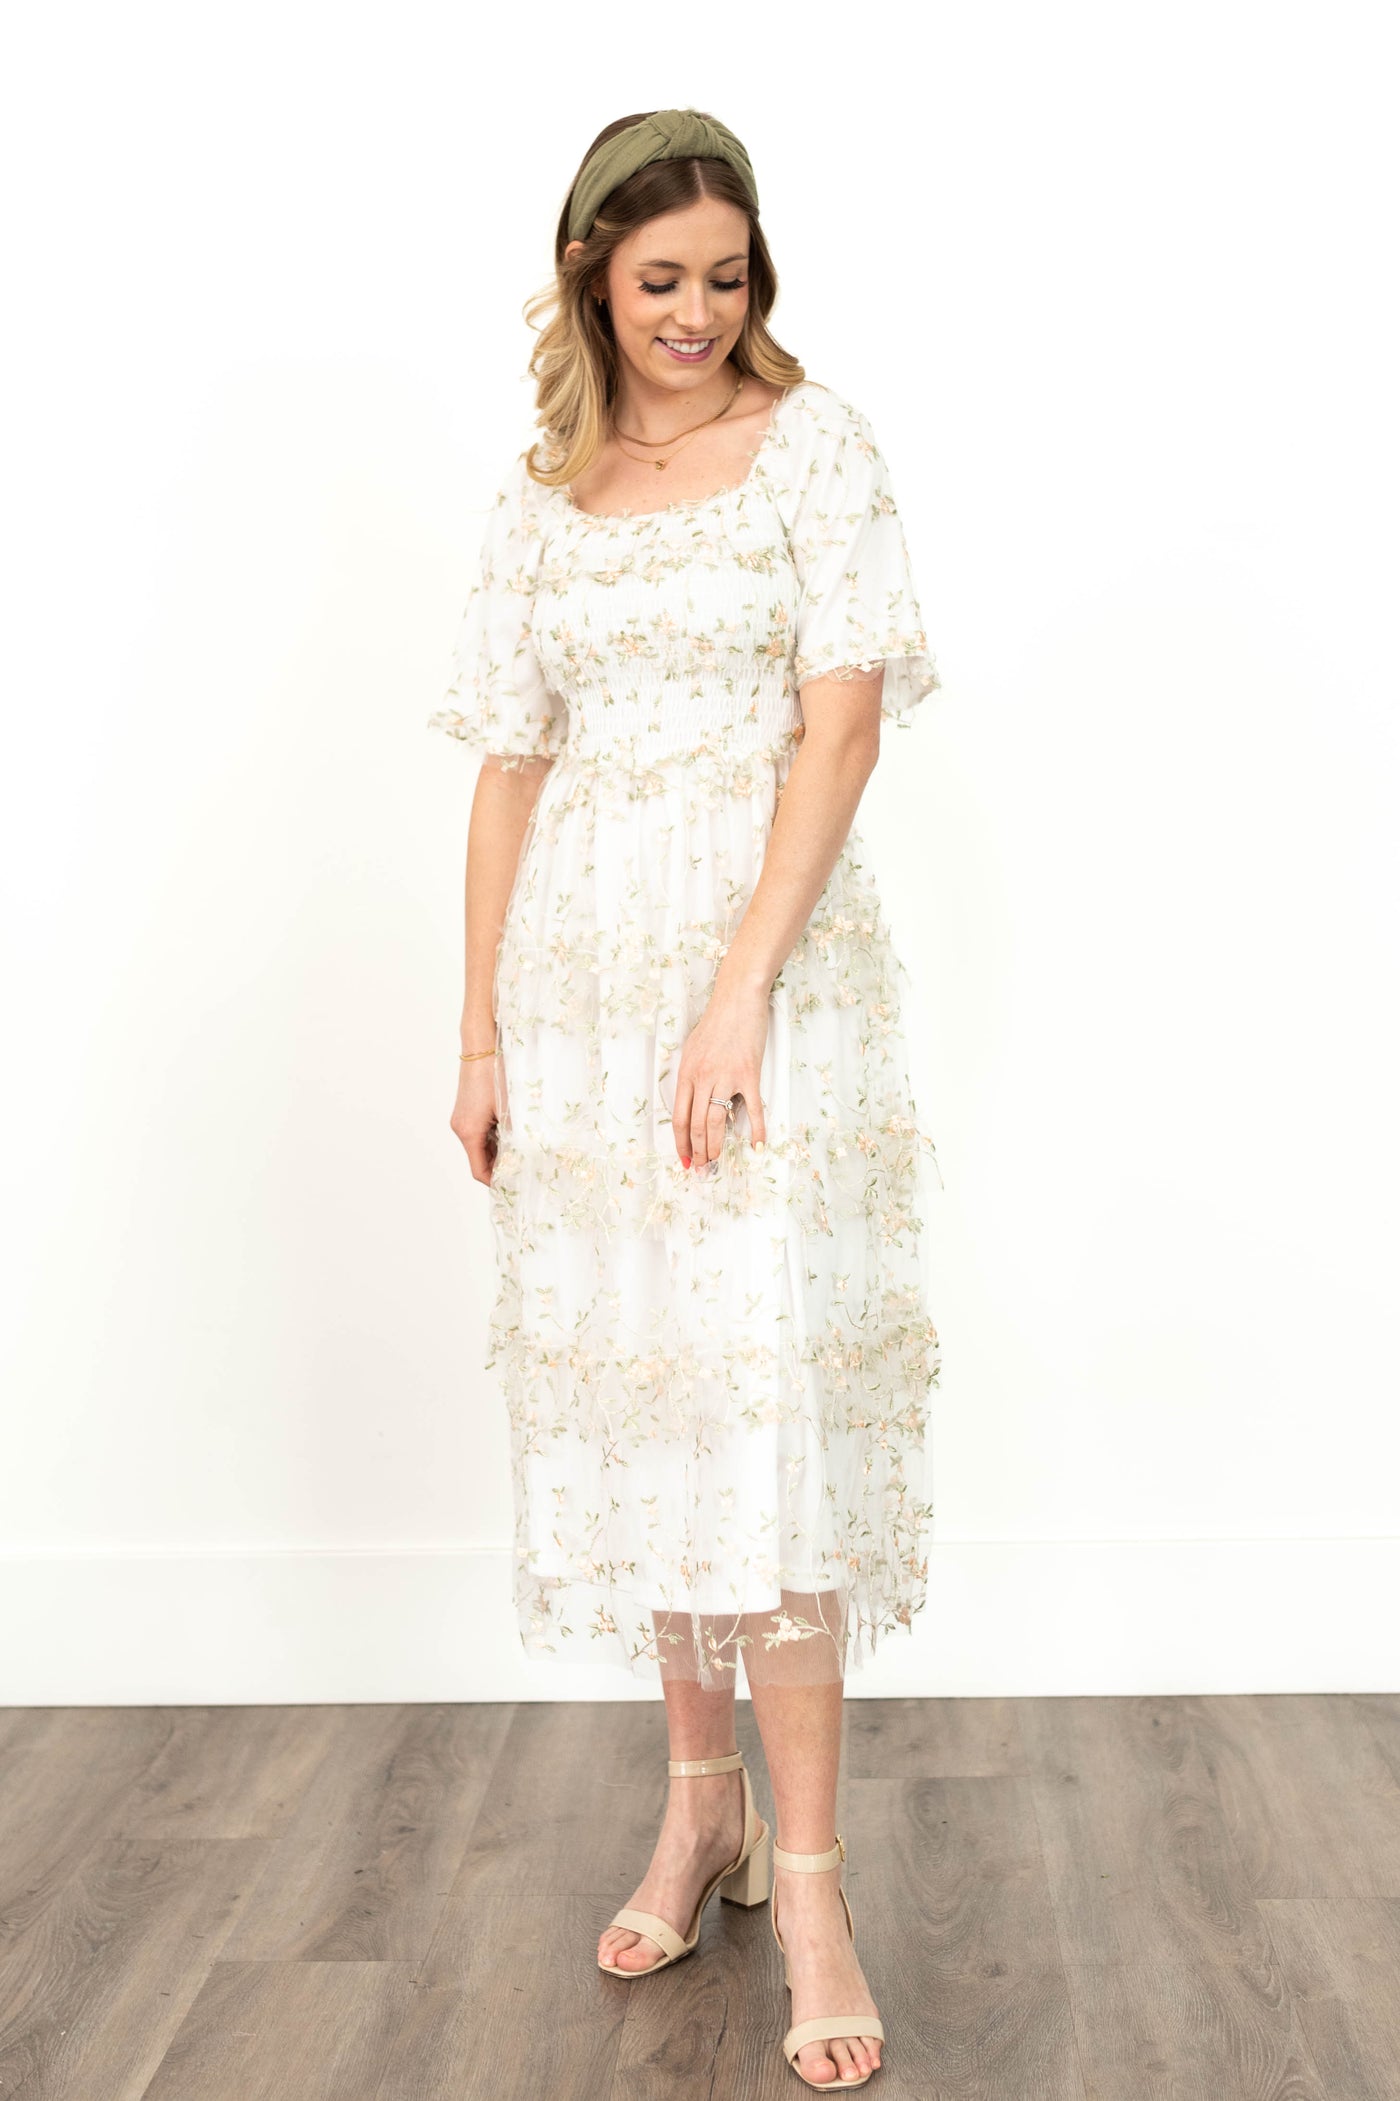 White floral dress with short sleeves and embroidery on the netting